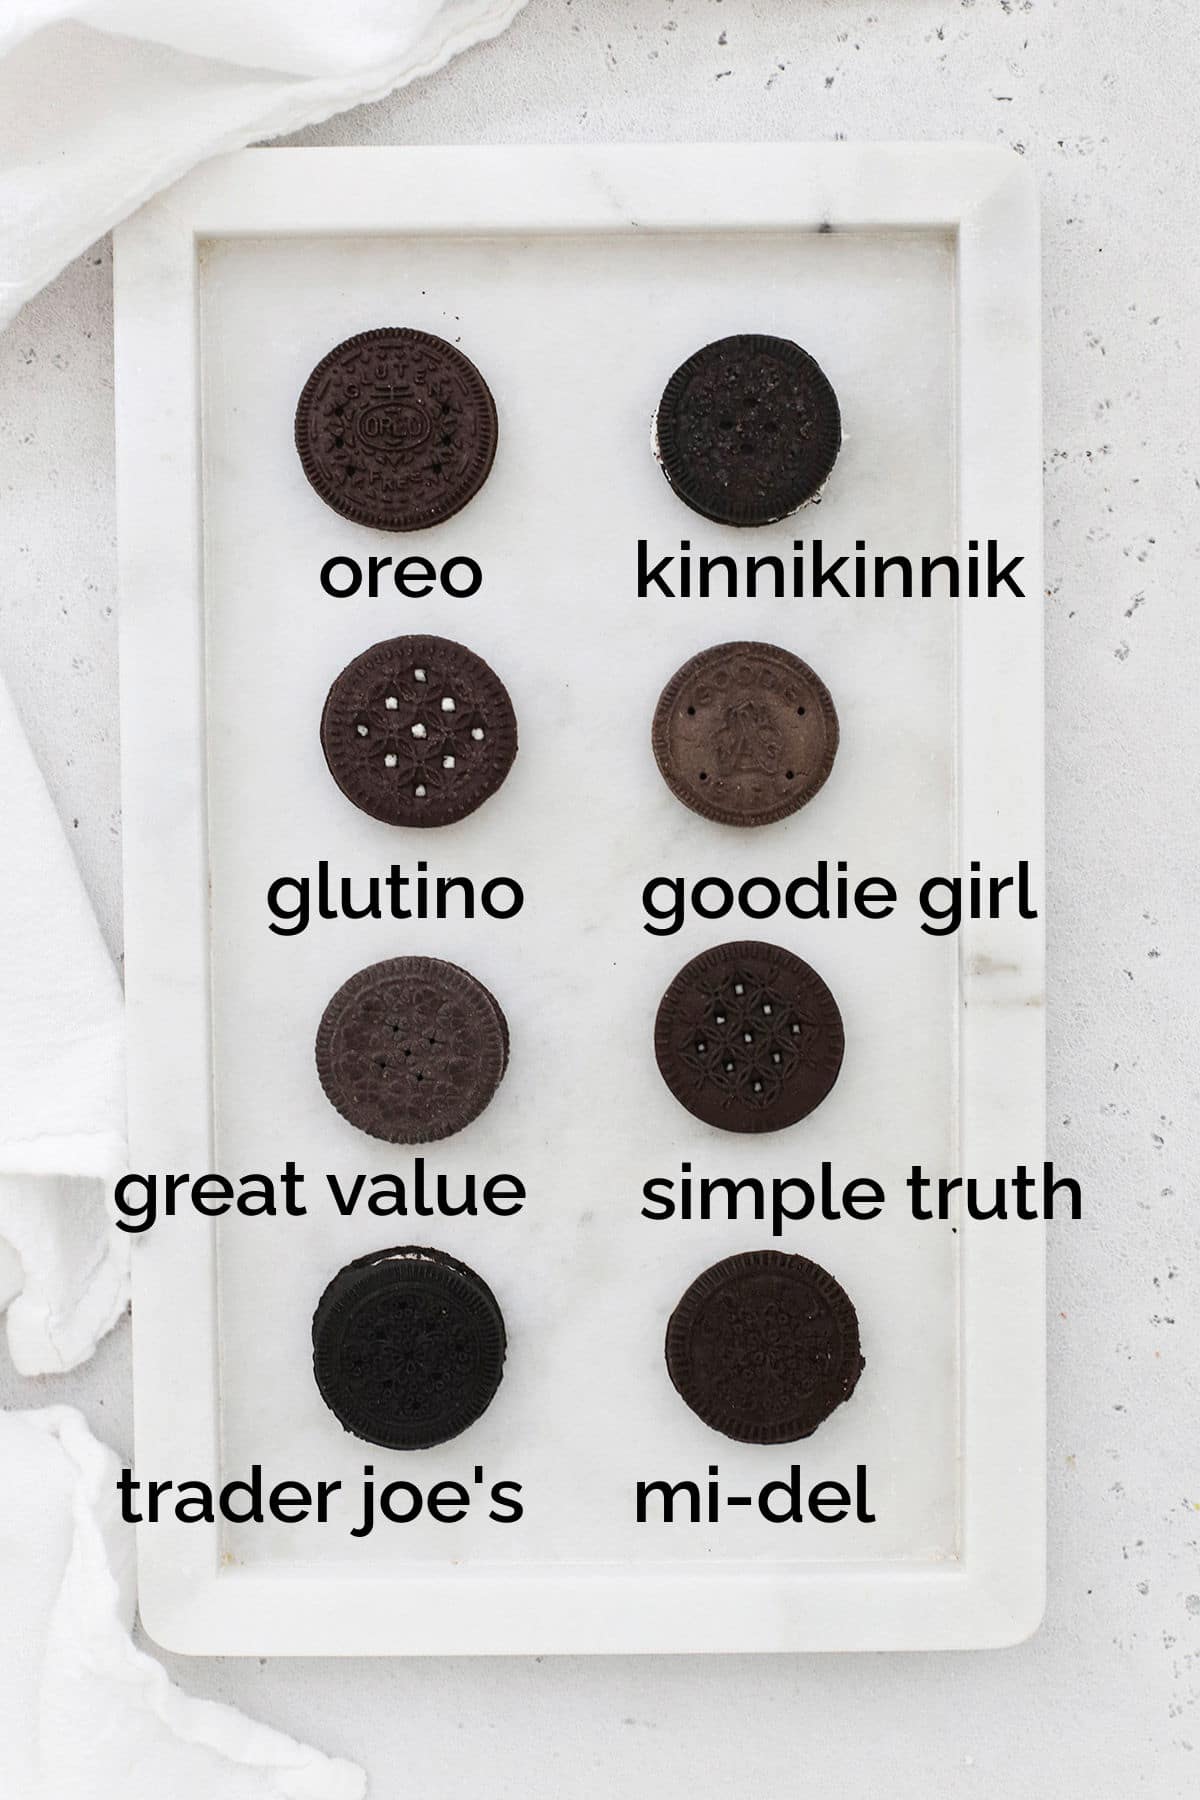 Overhead view of 8 kinds of gluten-free chocolate sandwich cookies, with labels of each brand under the cookie